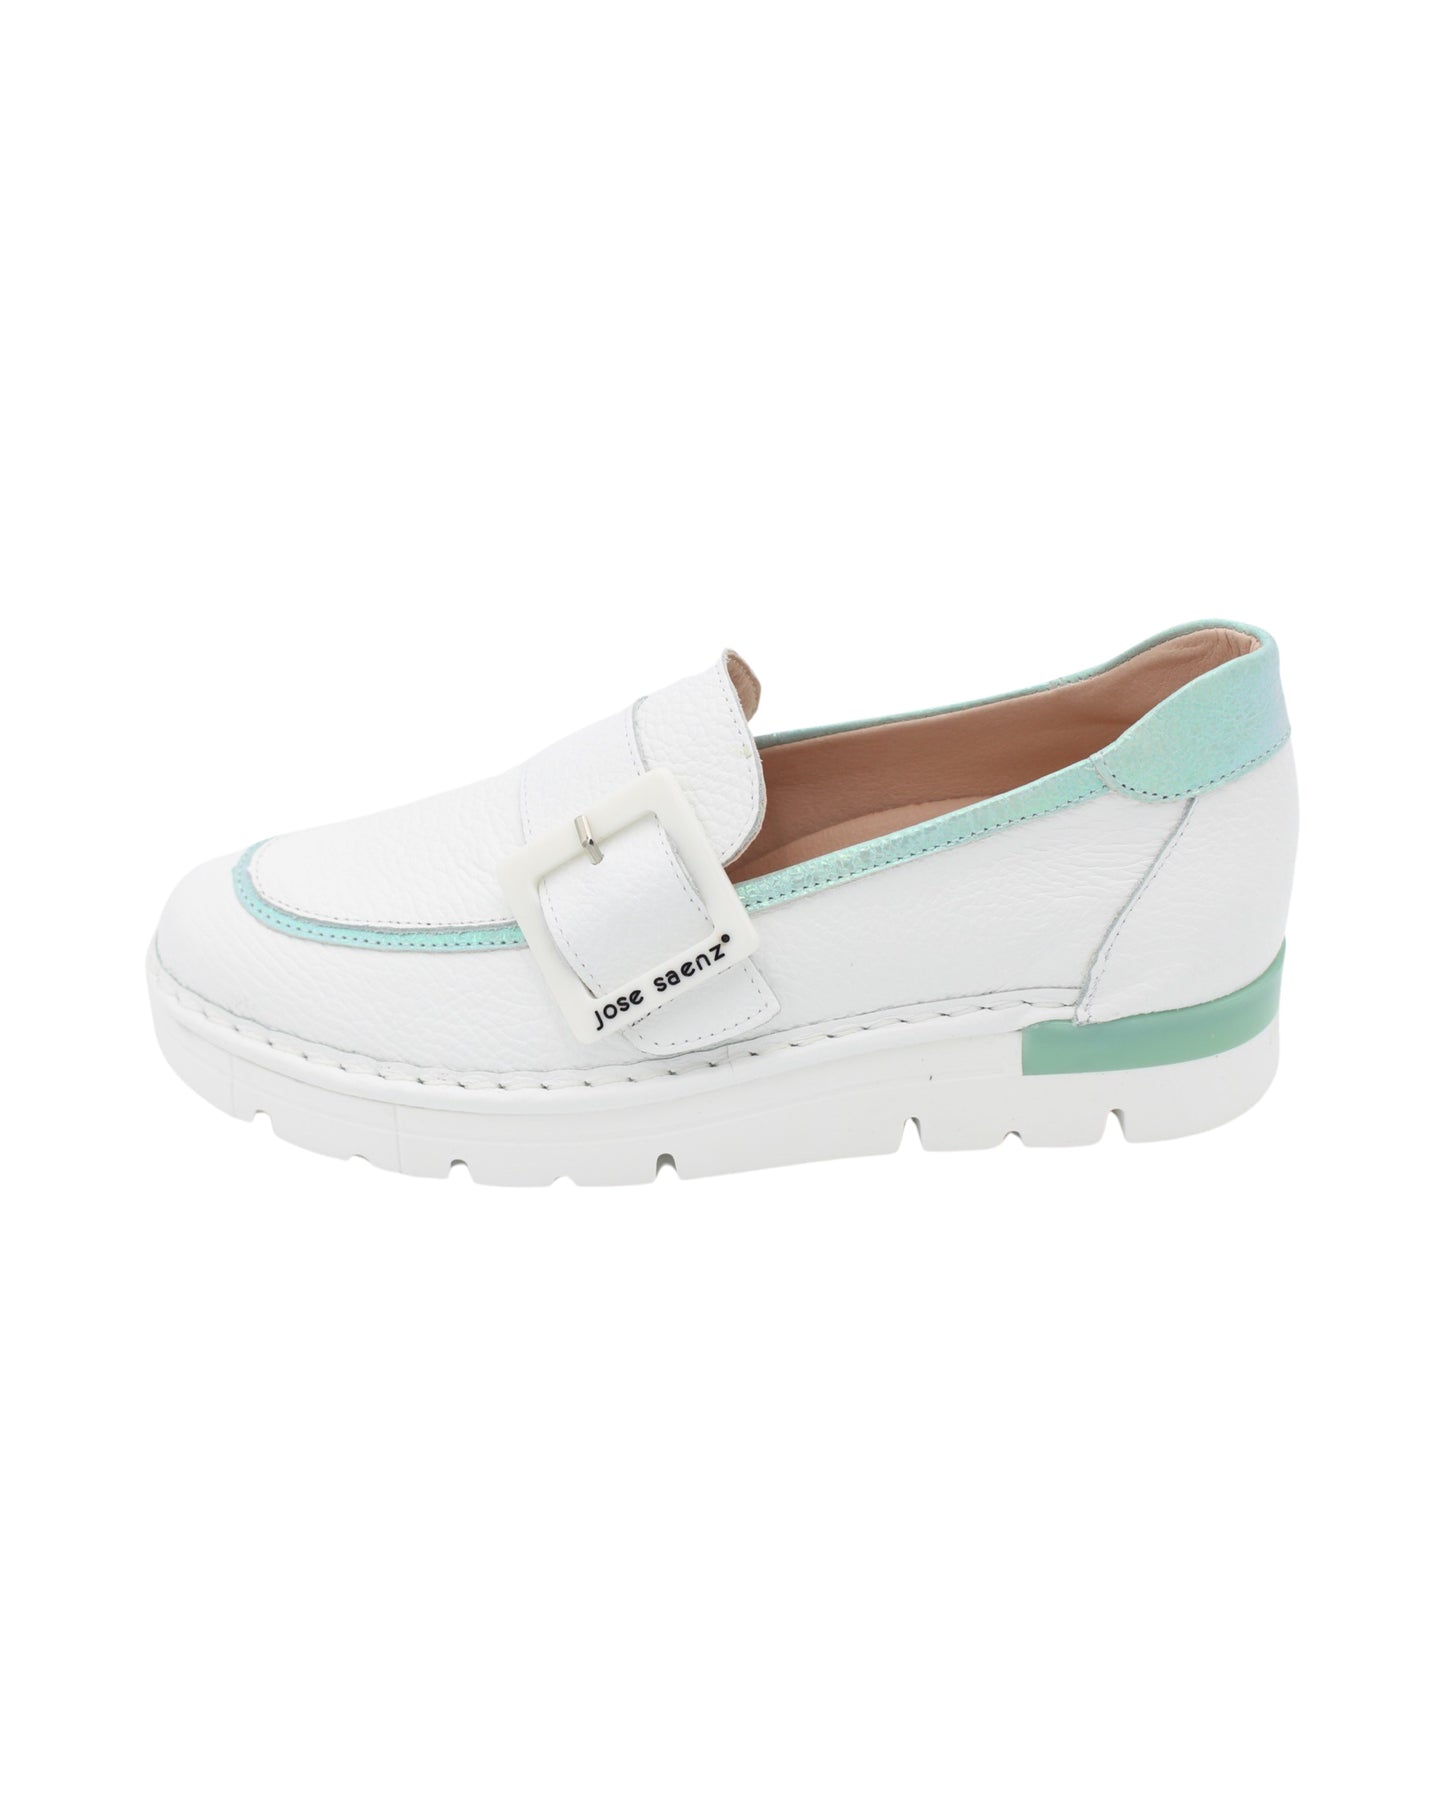 Jose Saenz - Ladies Shoes Loafers White,  Turquoise (1991)